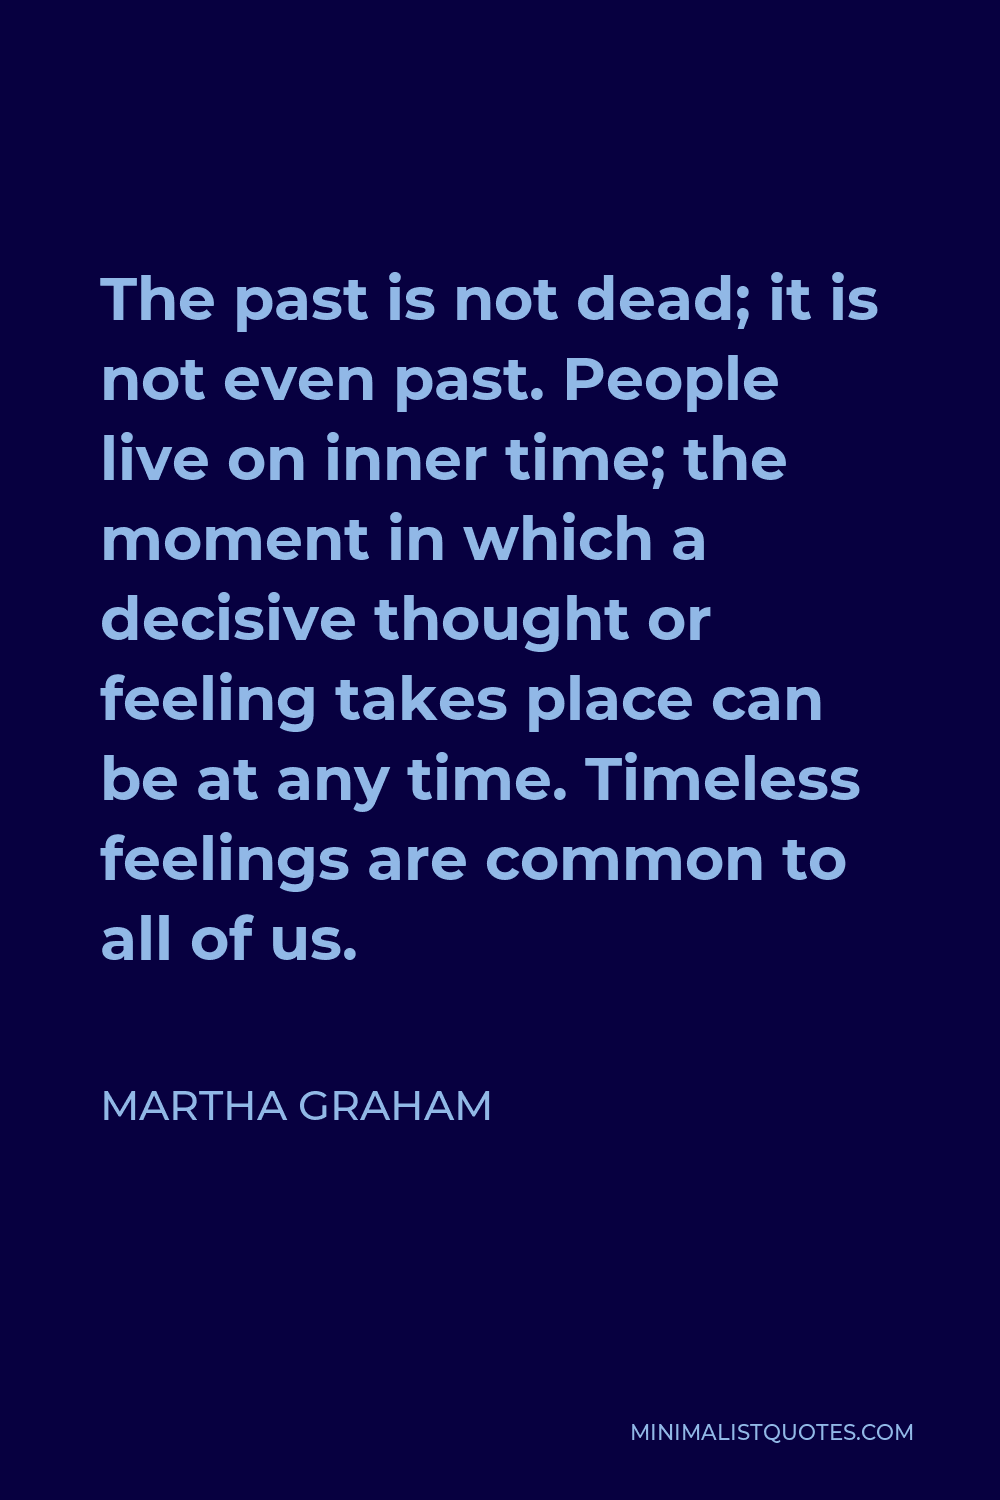 Martha Graham Quote - The past is not dead; it is not even past. People live on inner time; the moment in which a decisive thought or feeling takes place can be at any time. Timeless feelings are common to all of us.